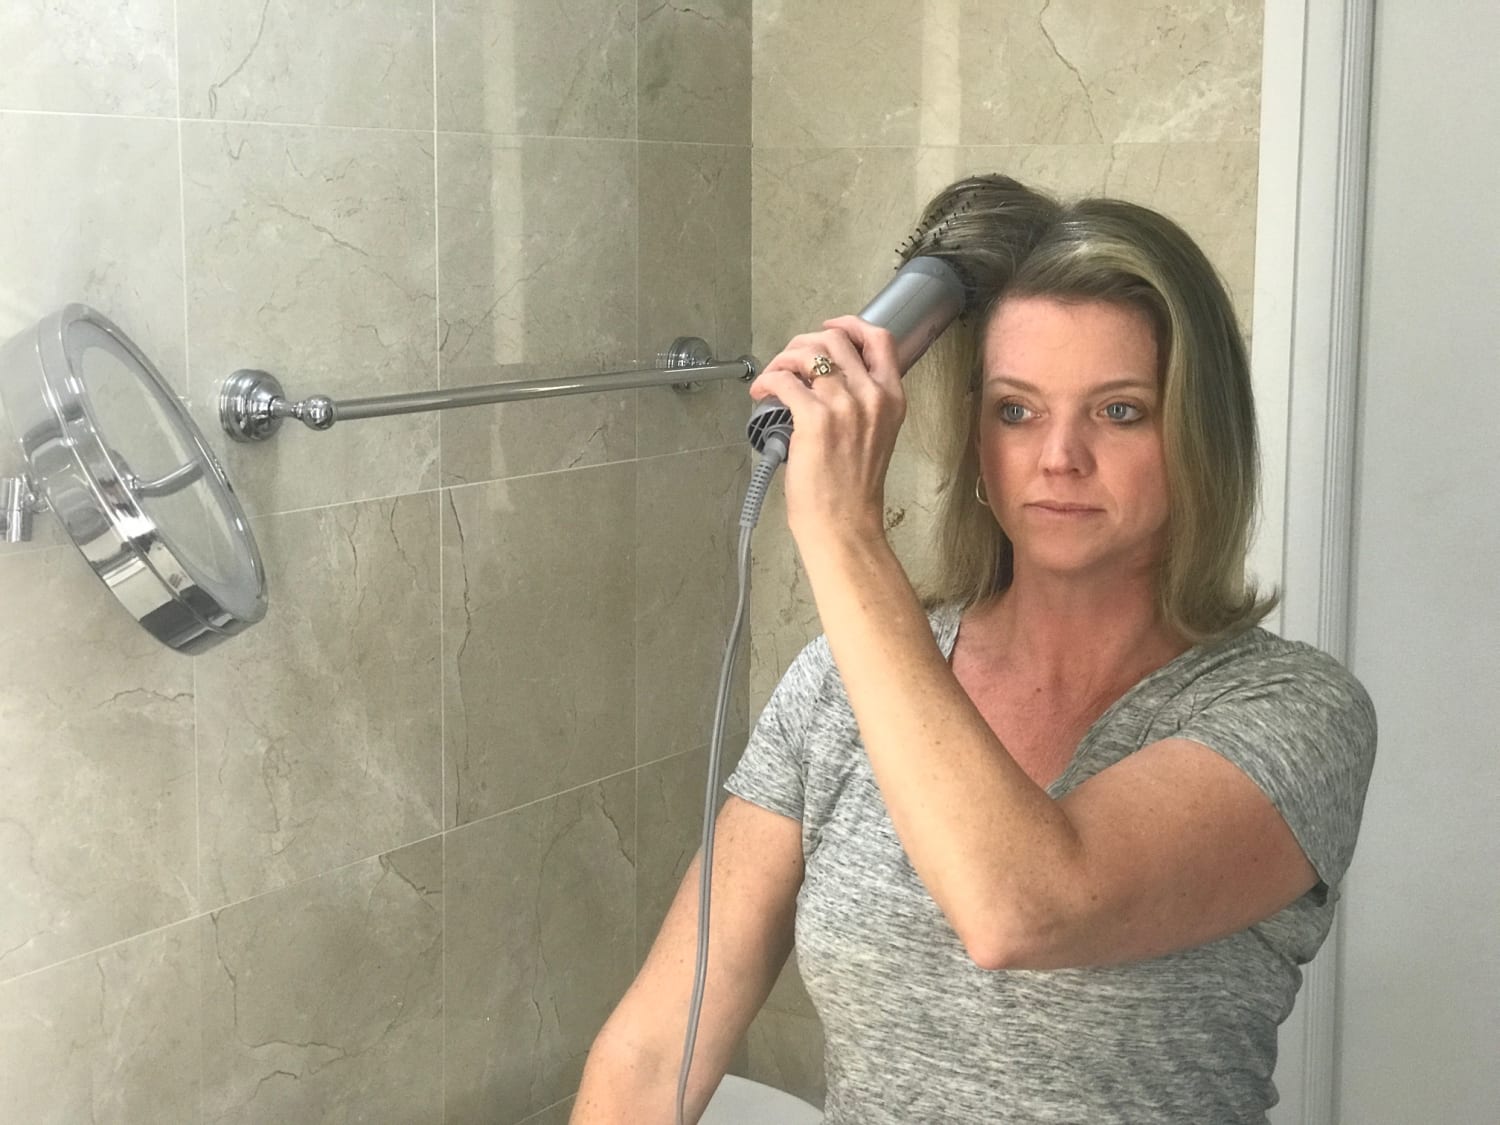 John Freida hot air brush review: How to get an at-home blowout